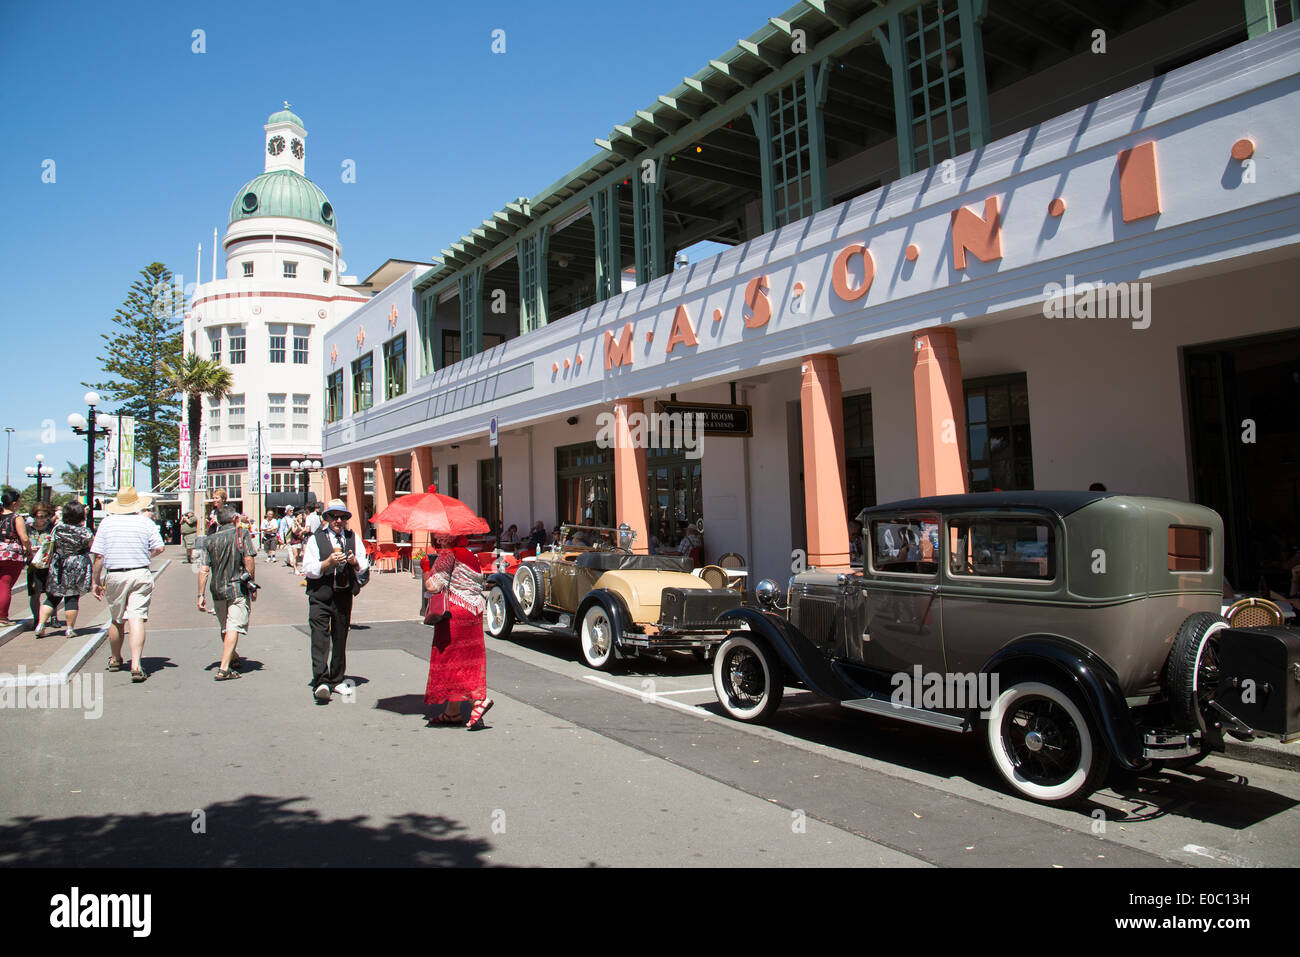 Classic vintage cars outside the Masonic Hotel in the art deco town of Napier New Zealand An annual event attracting visitors Stock Photo